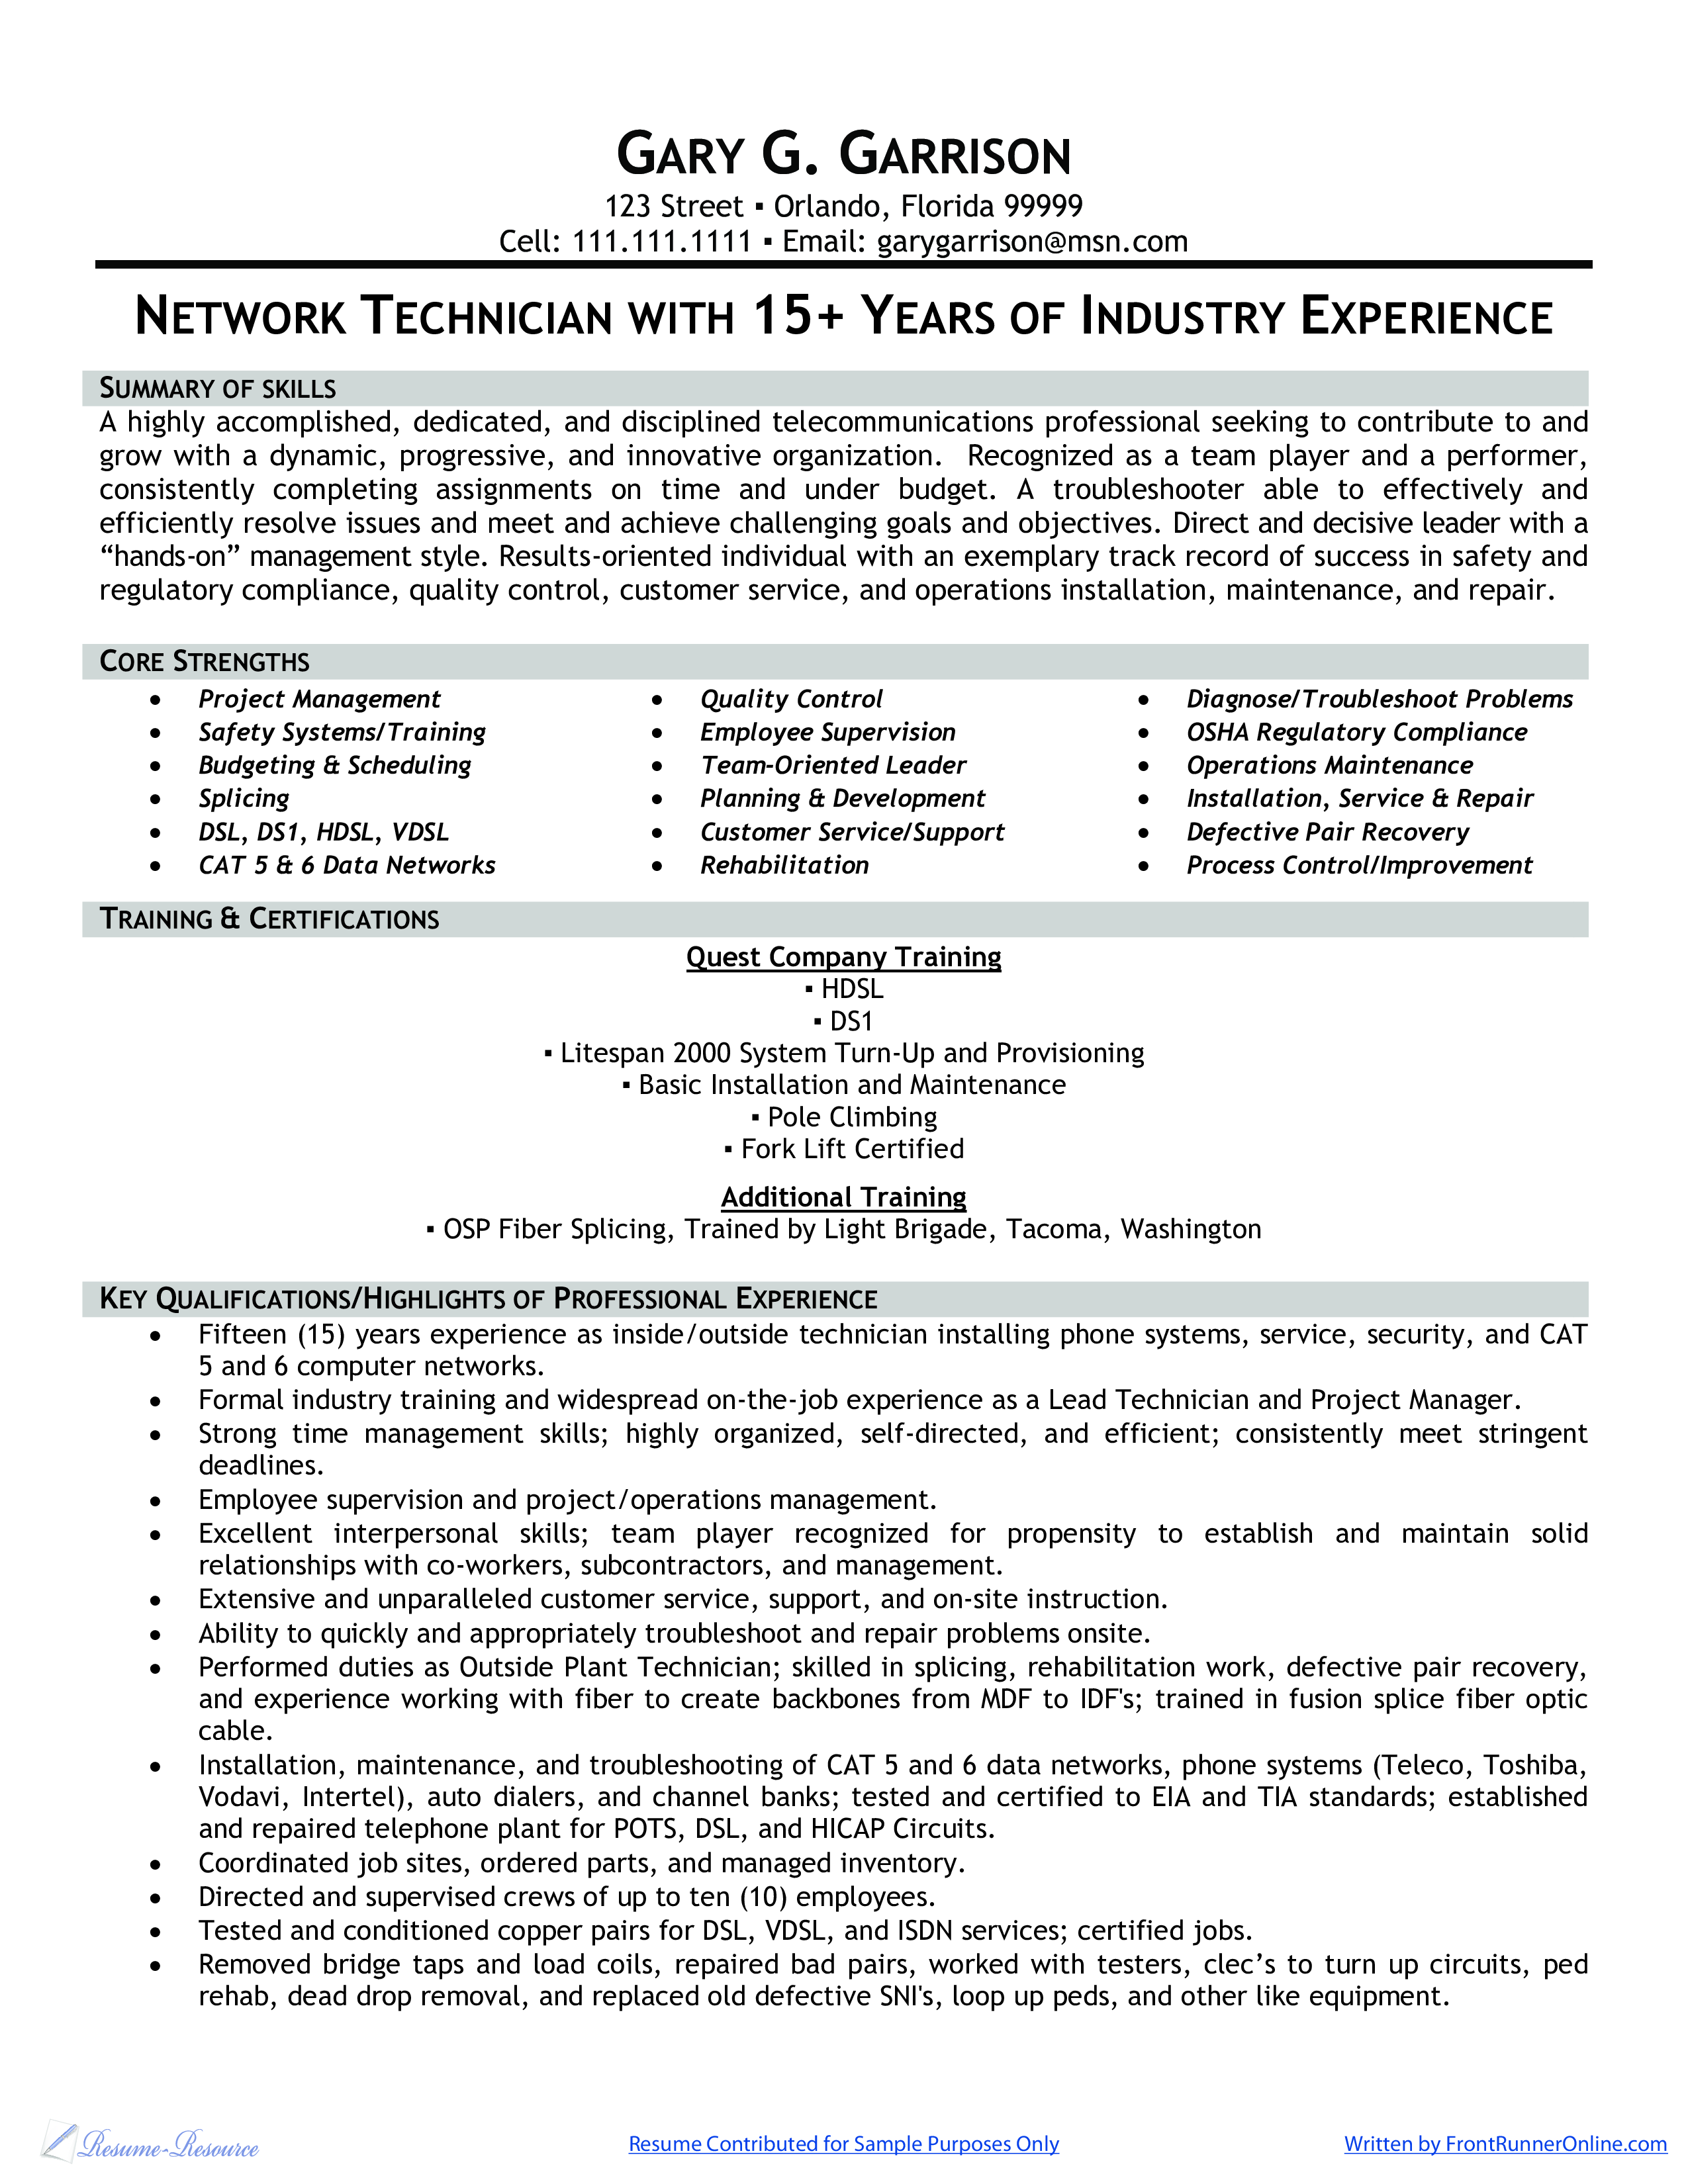 Resume for a Network Technician main image